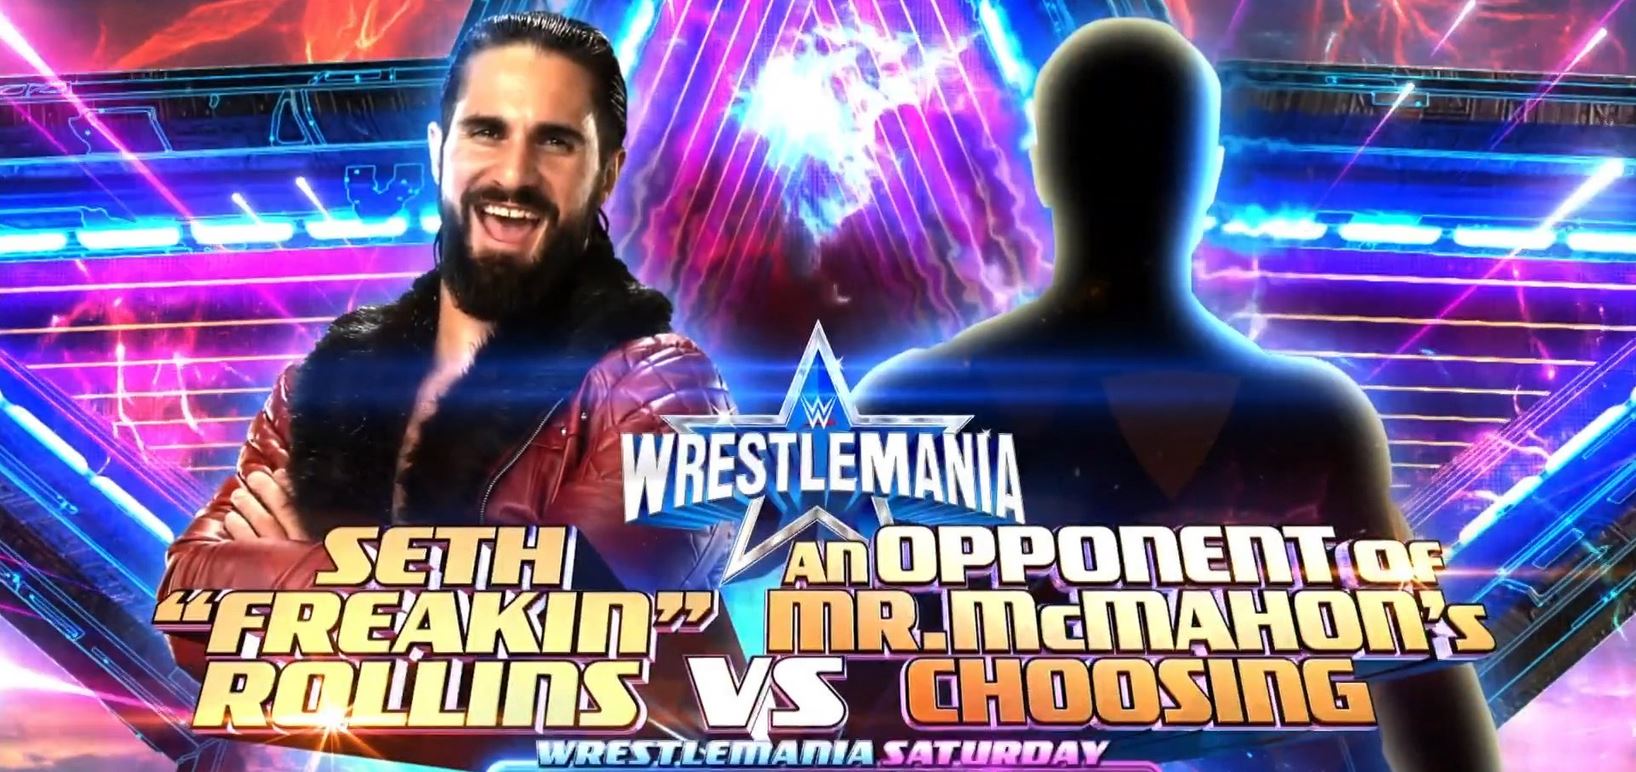 WWE Provides Details On The WrestleMania 39 Superstore